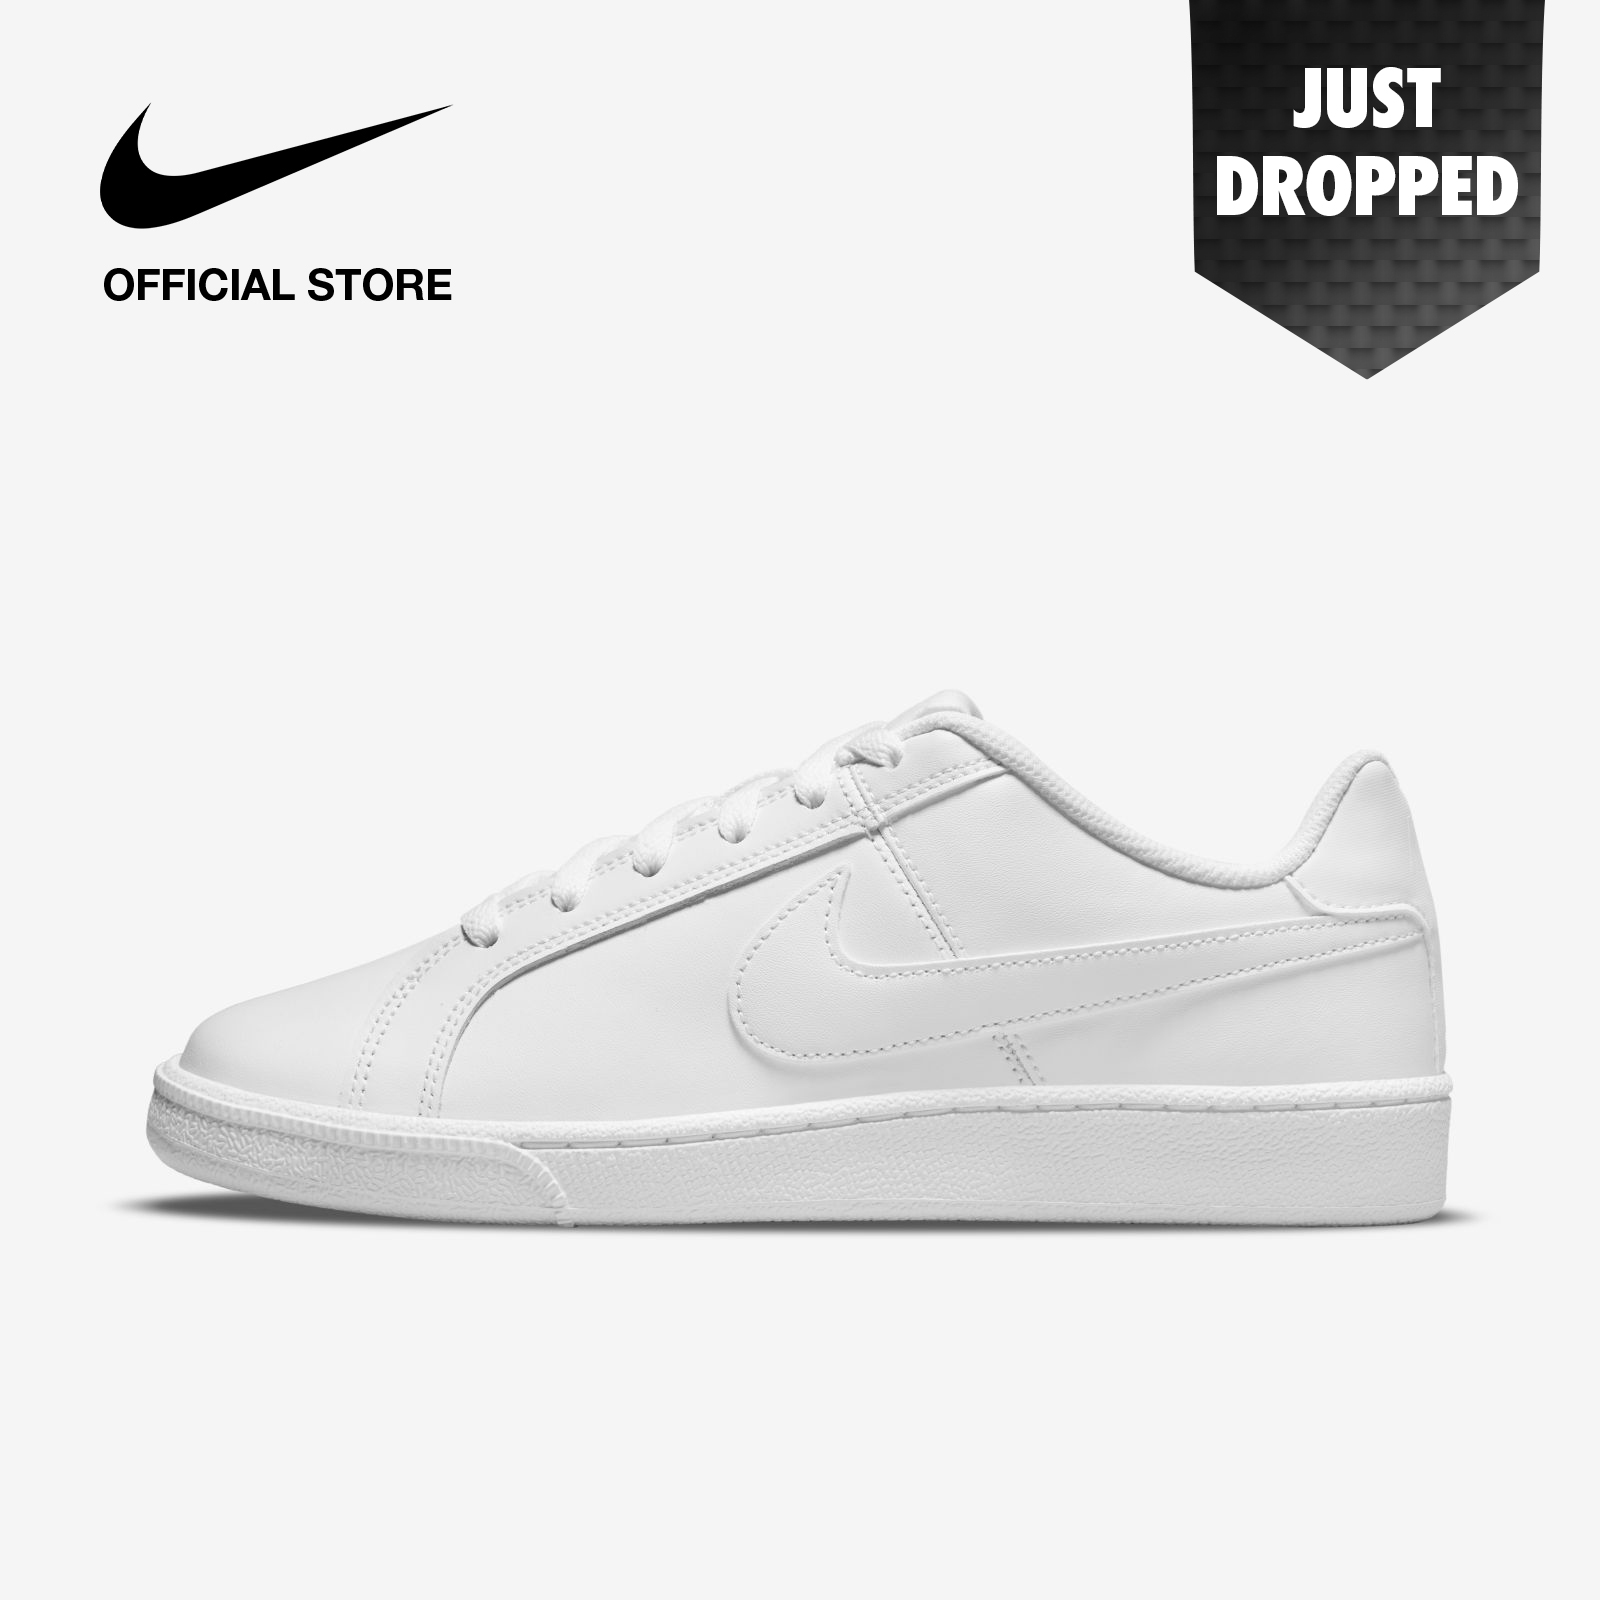 Nike Women's Court Royale Shoes - White - MixASale